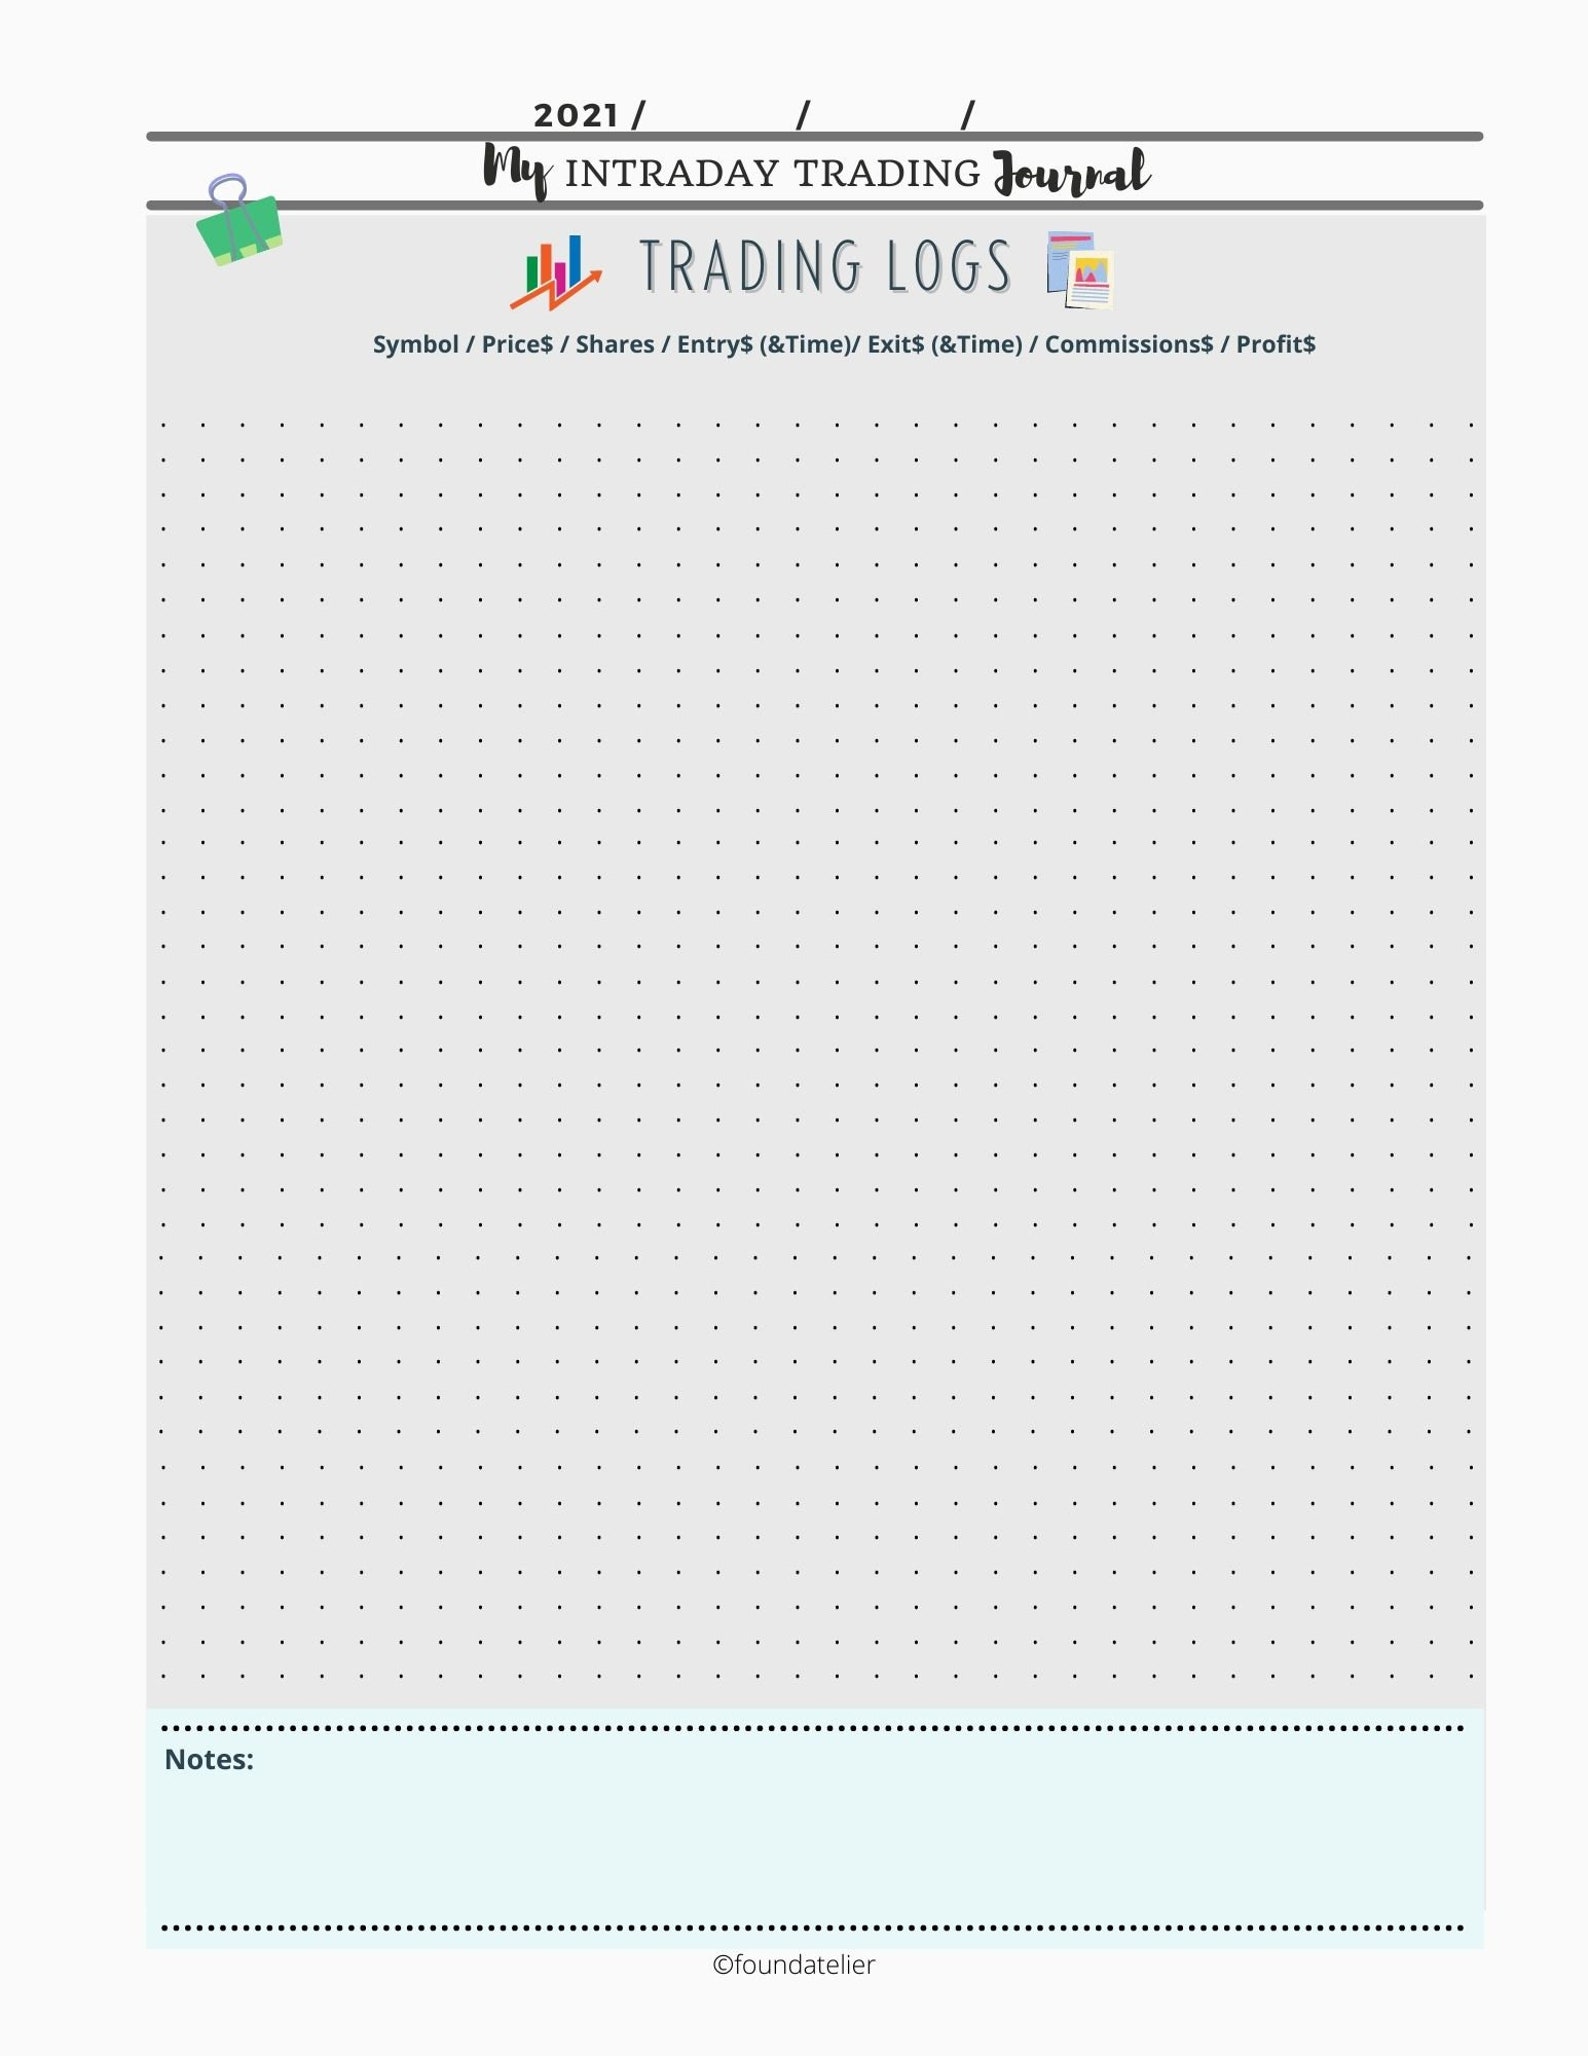 2021 My Intraday Trading Journal / Stock Trading Log / Instant Etsy